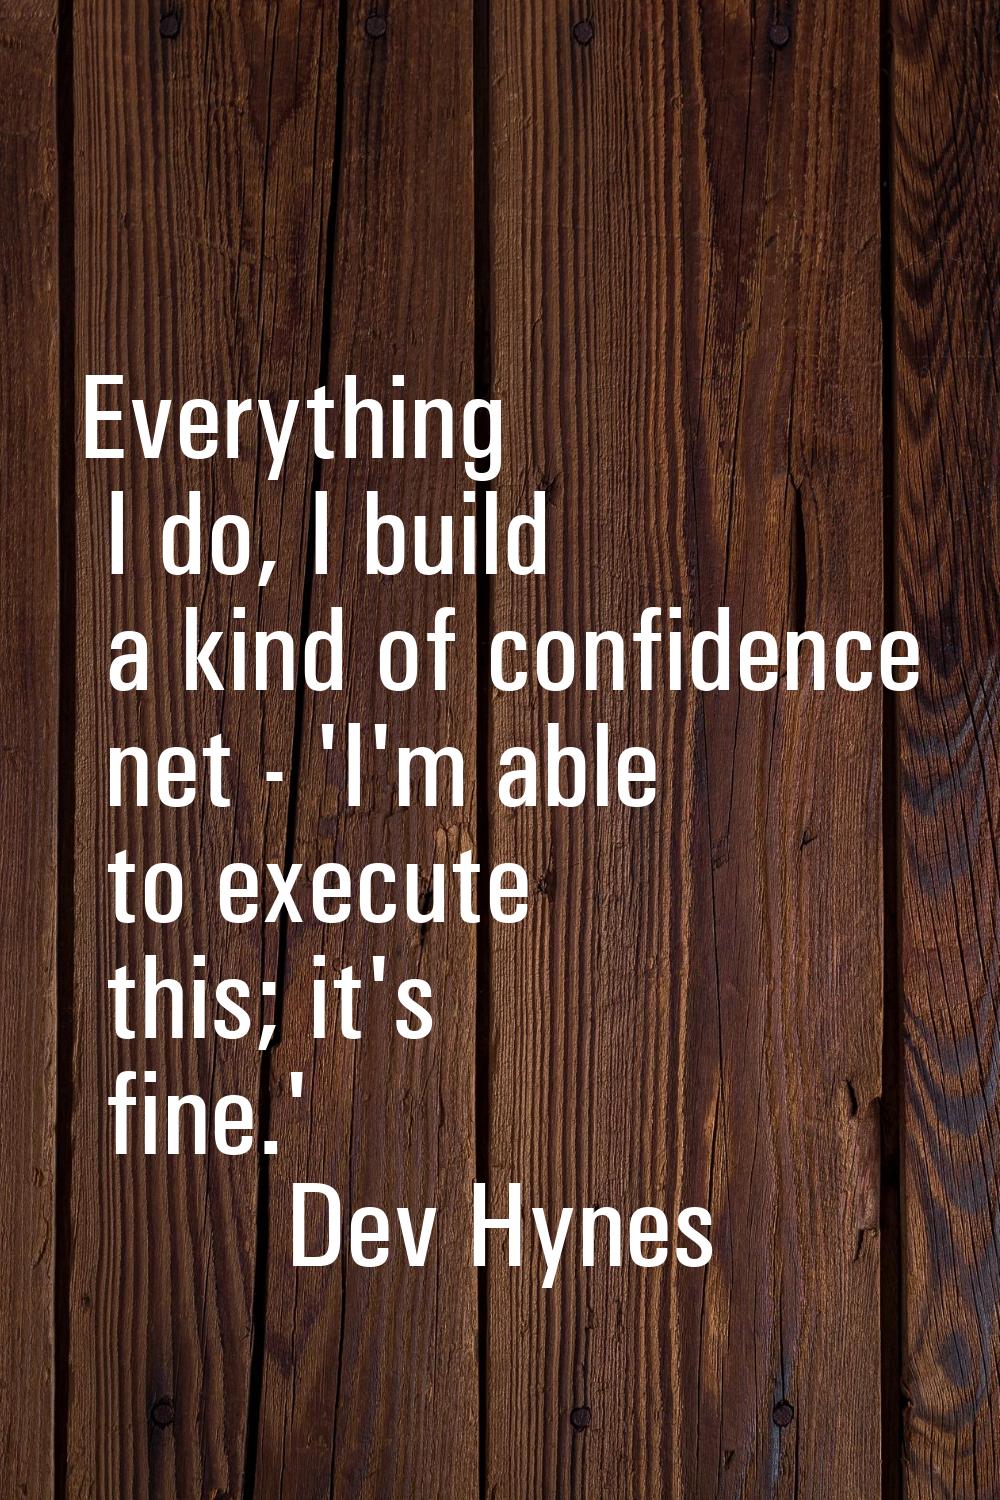 Everything I do, I build a kind of confidence net - 'I'm able to execute this; it's fine.'